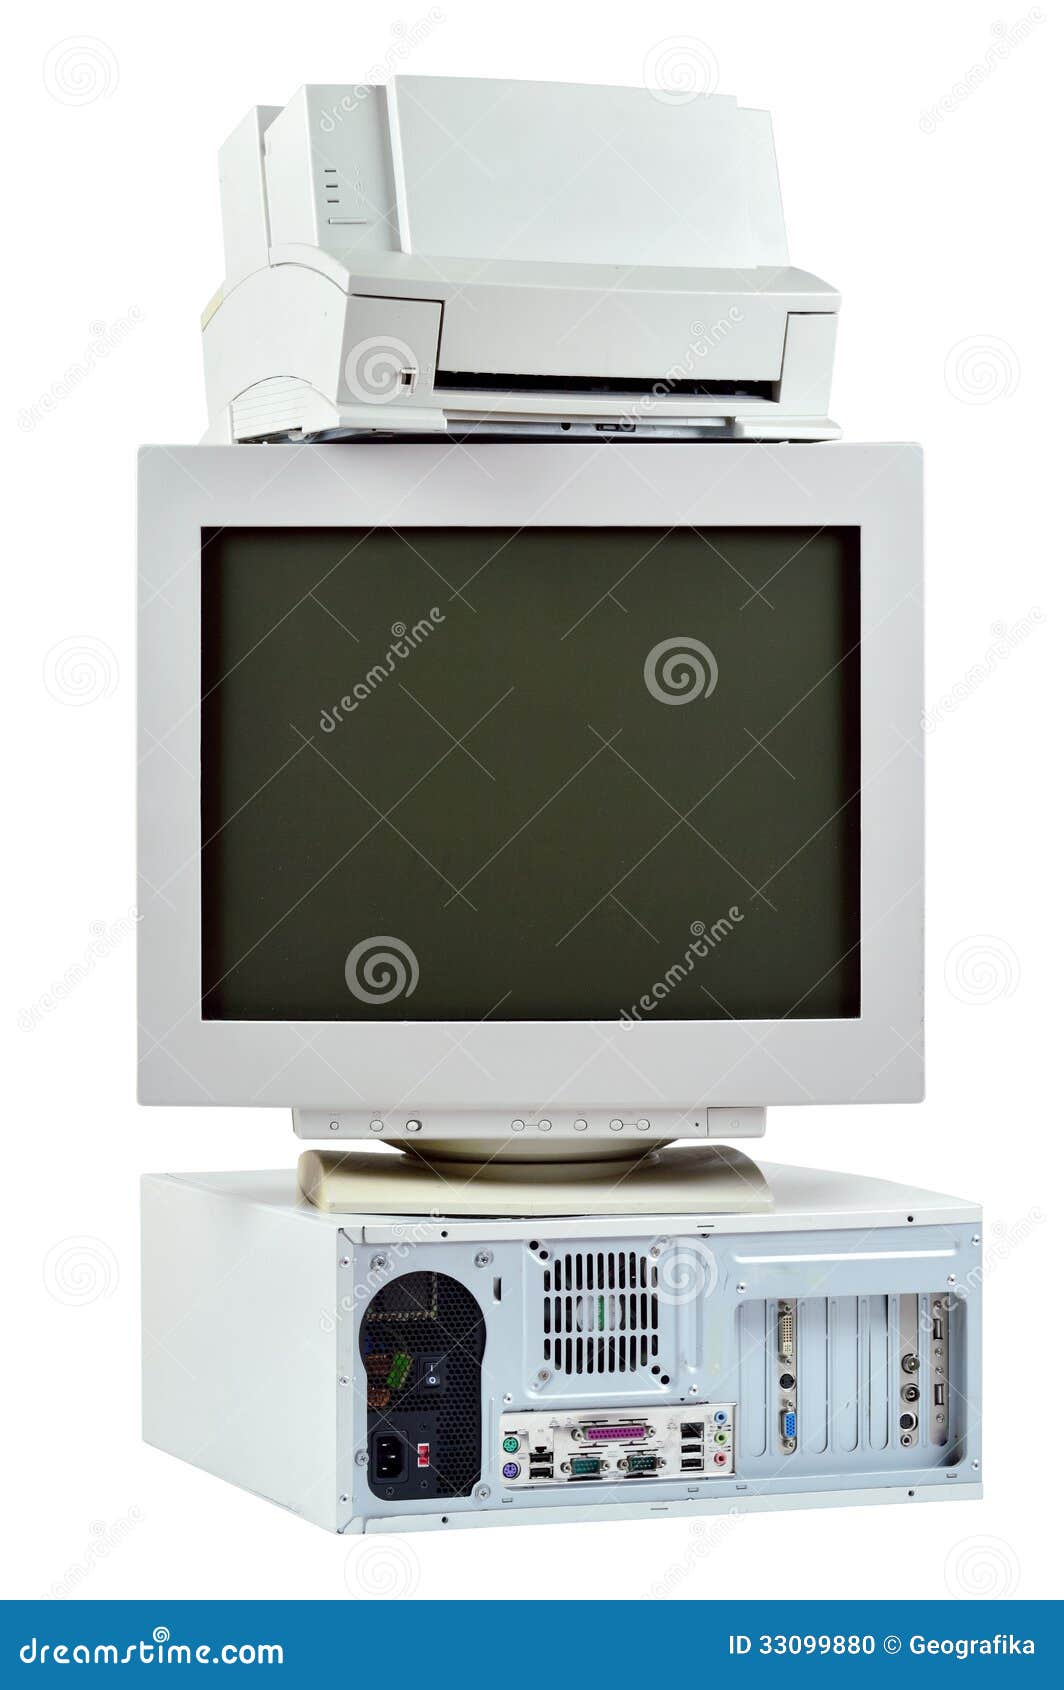 obsolete pc computer, printer and crt monitor